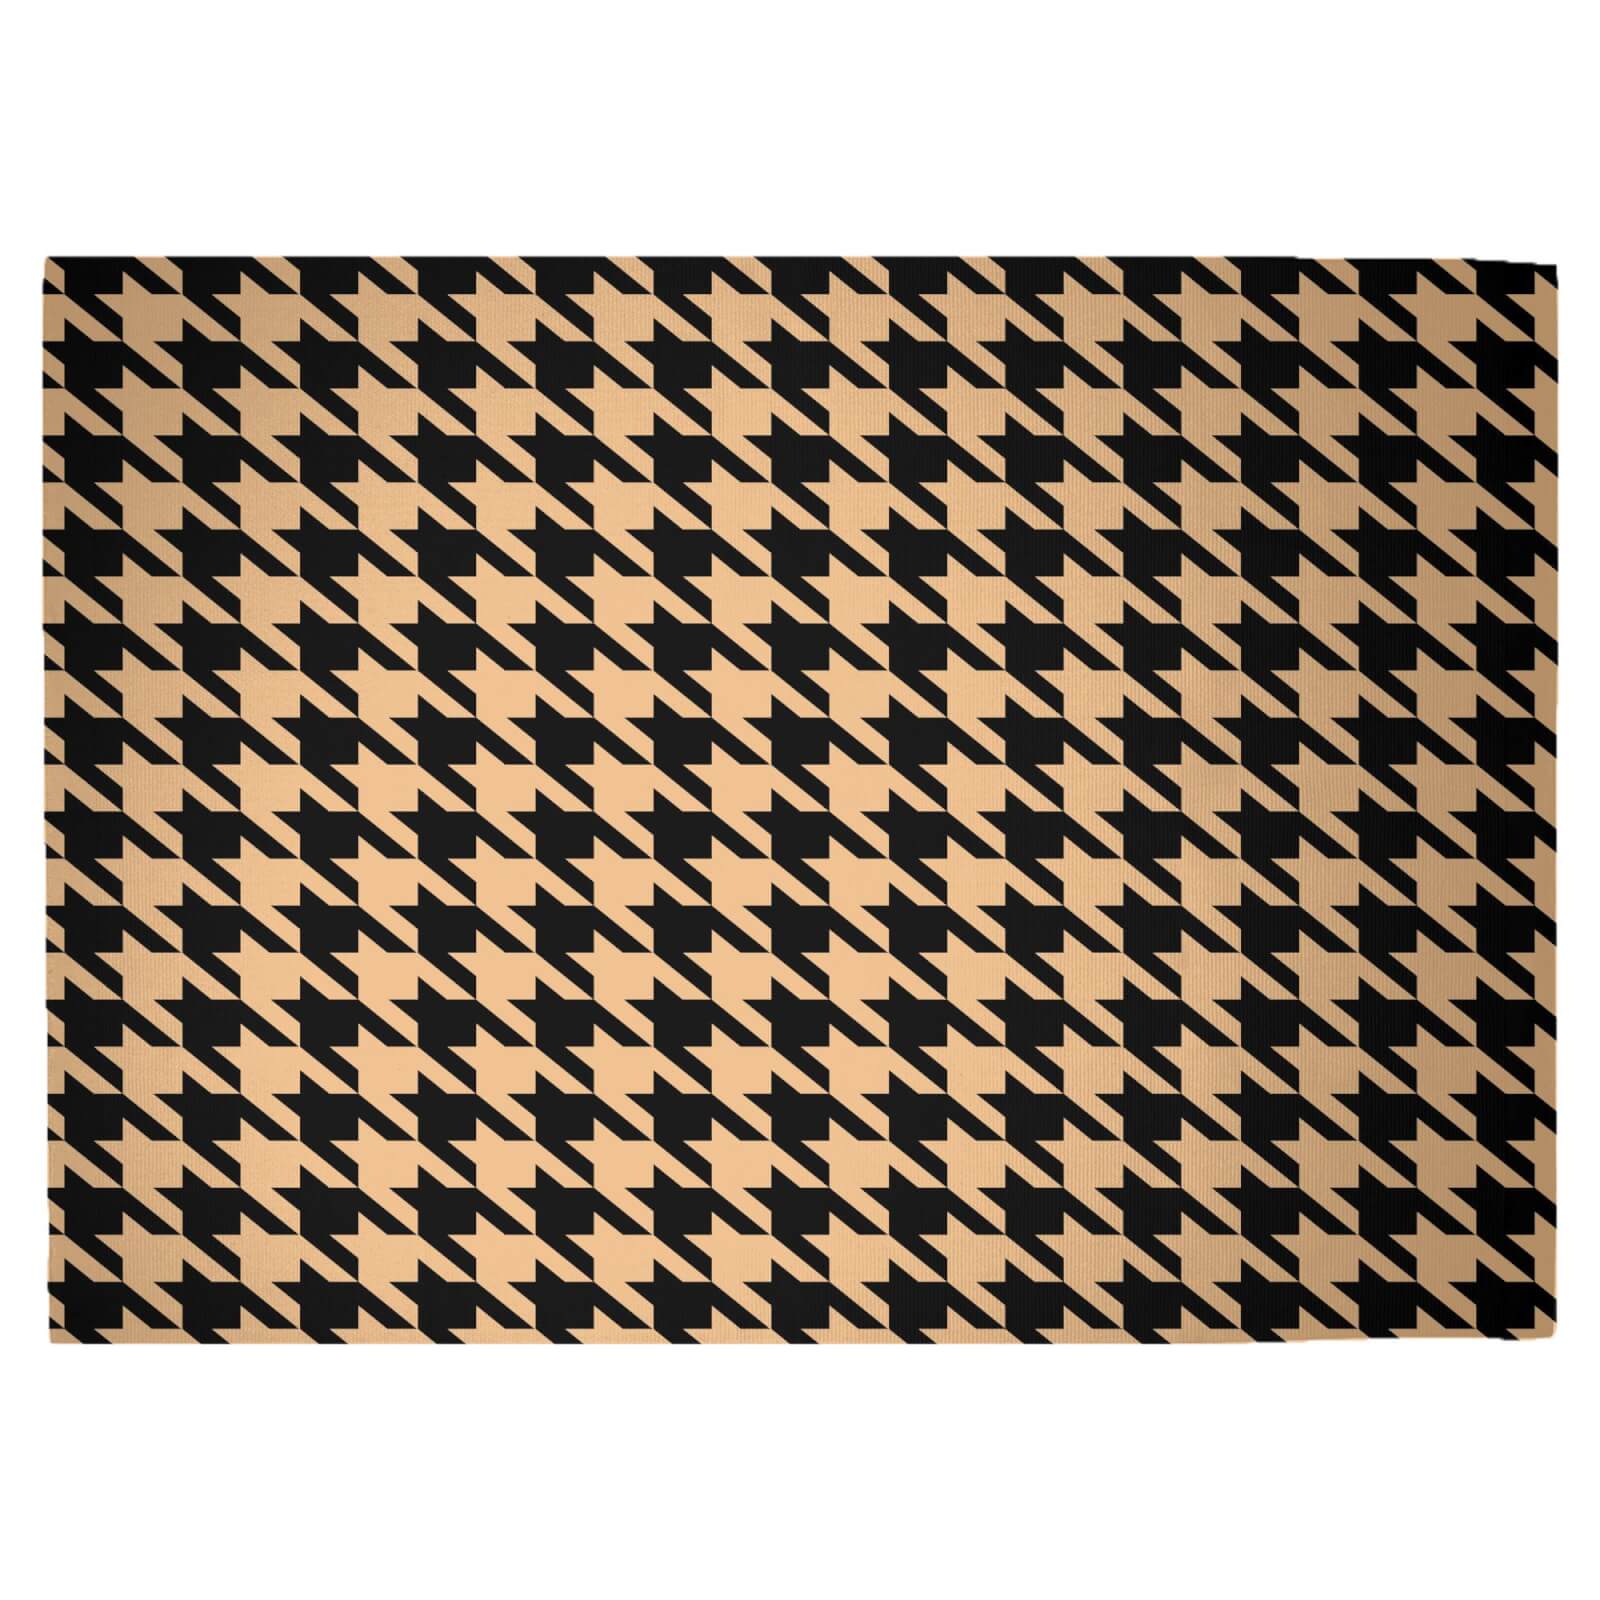 Biege Dogtooth Woven Rug - Large